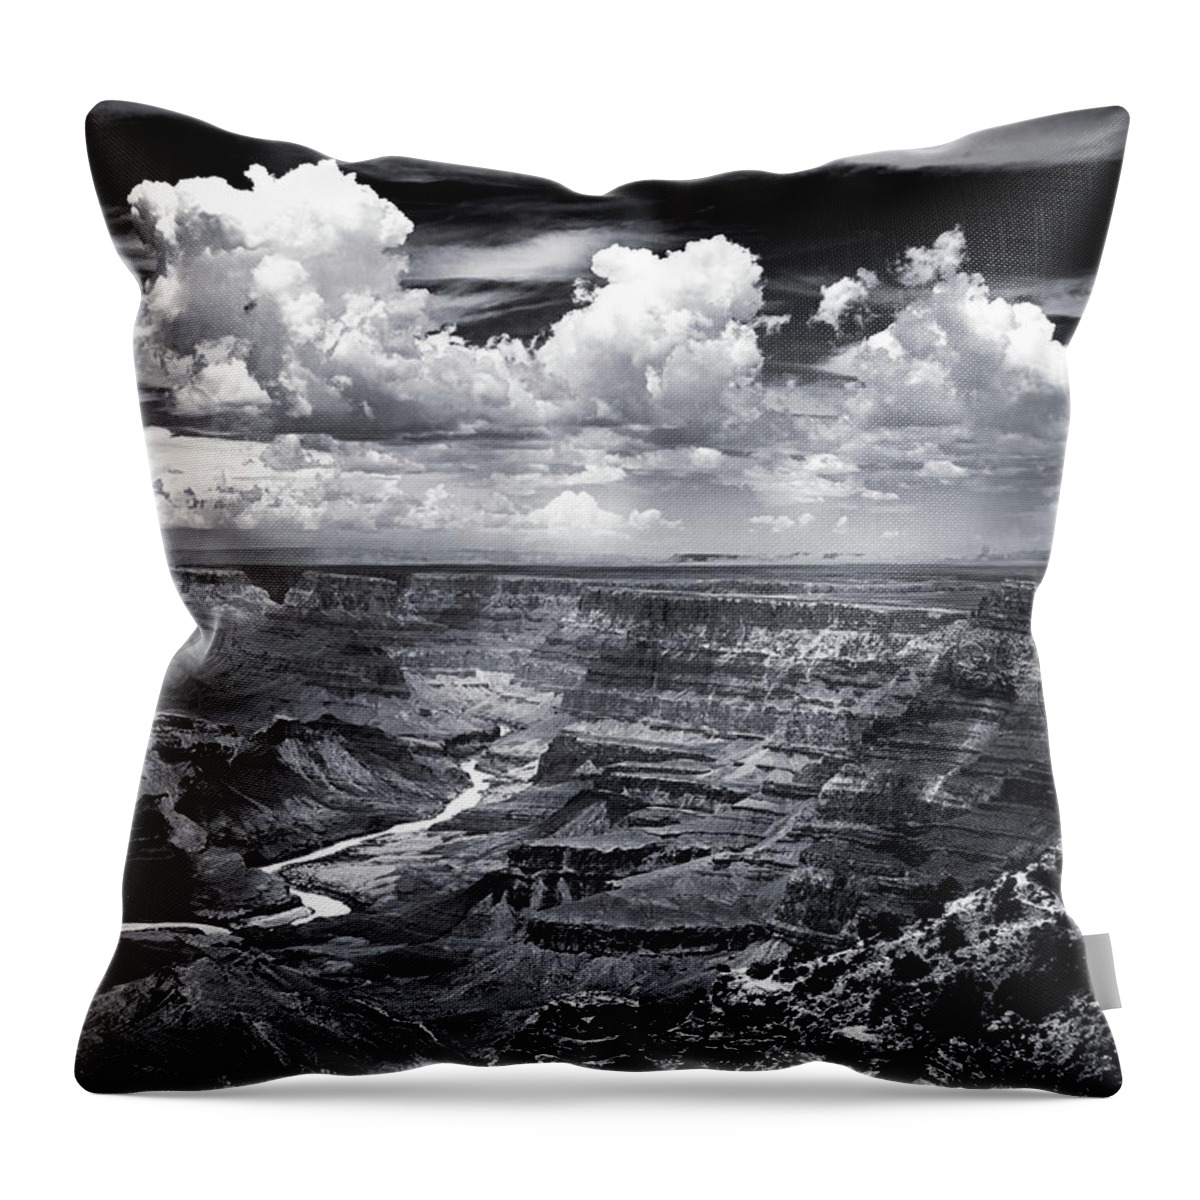 Black And White Throw Pillow featuring the photograph America's Grand Canyon by Mikes Nature